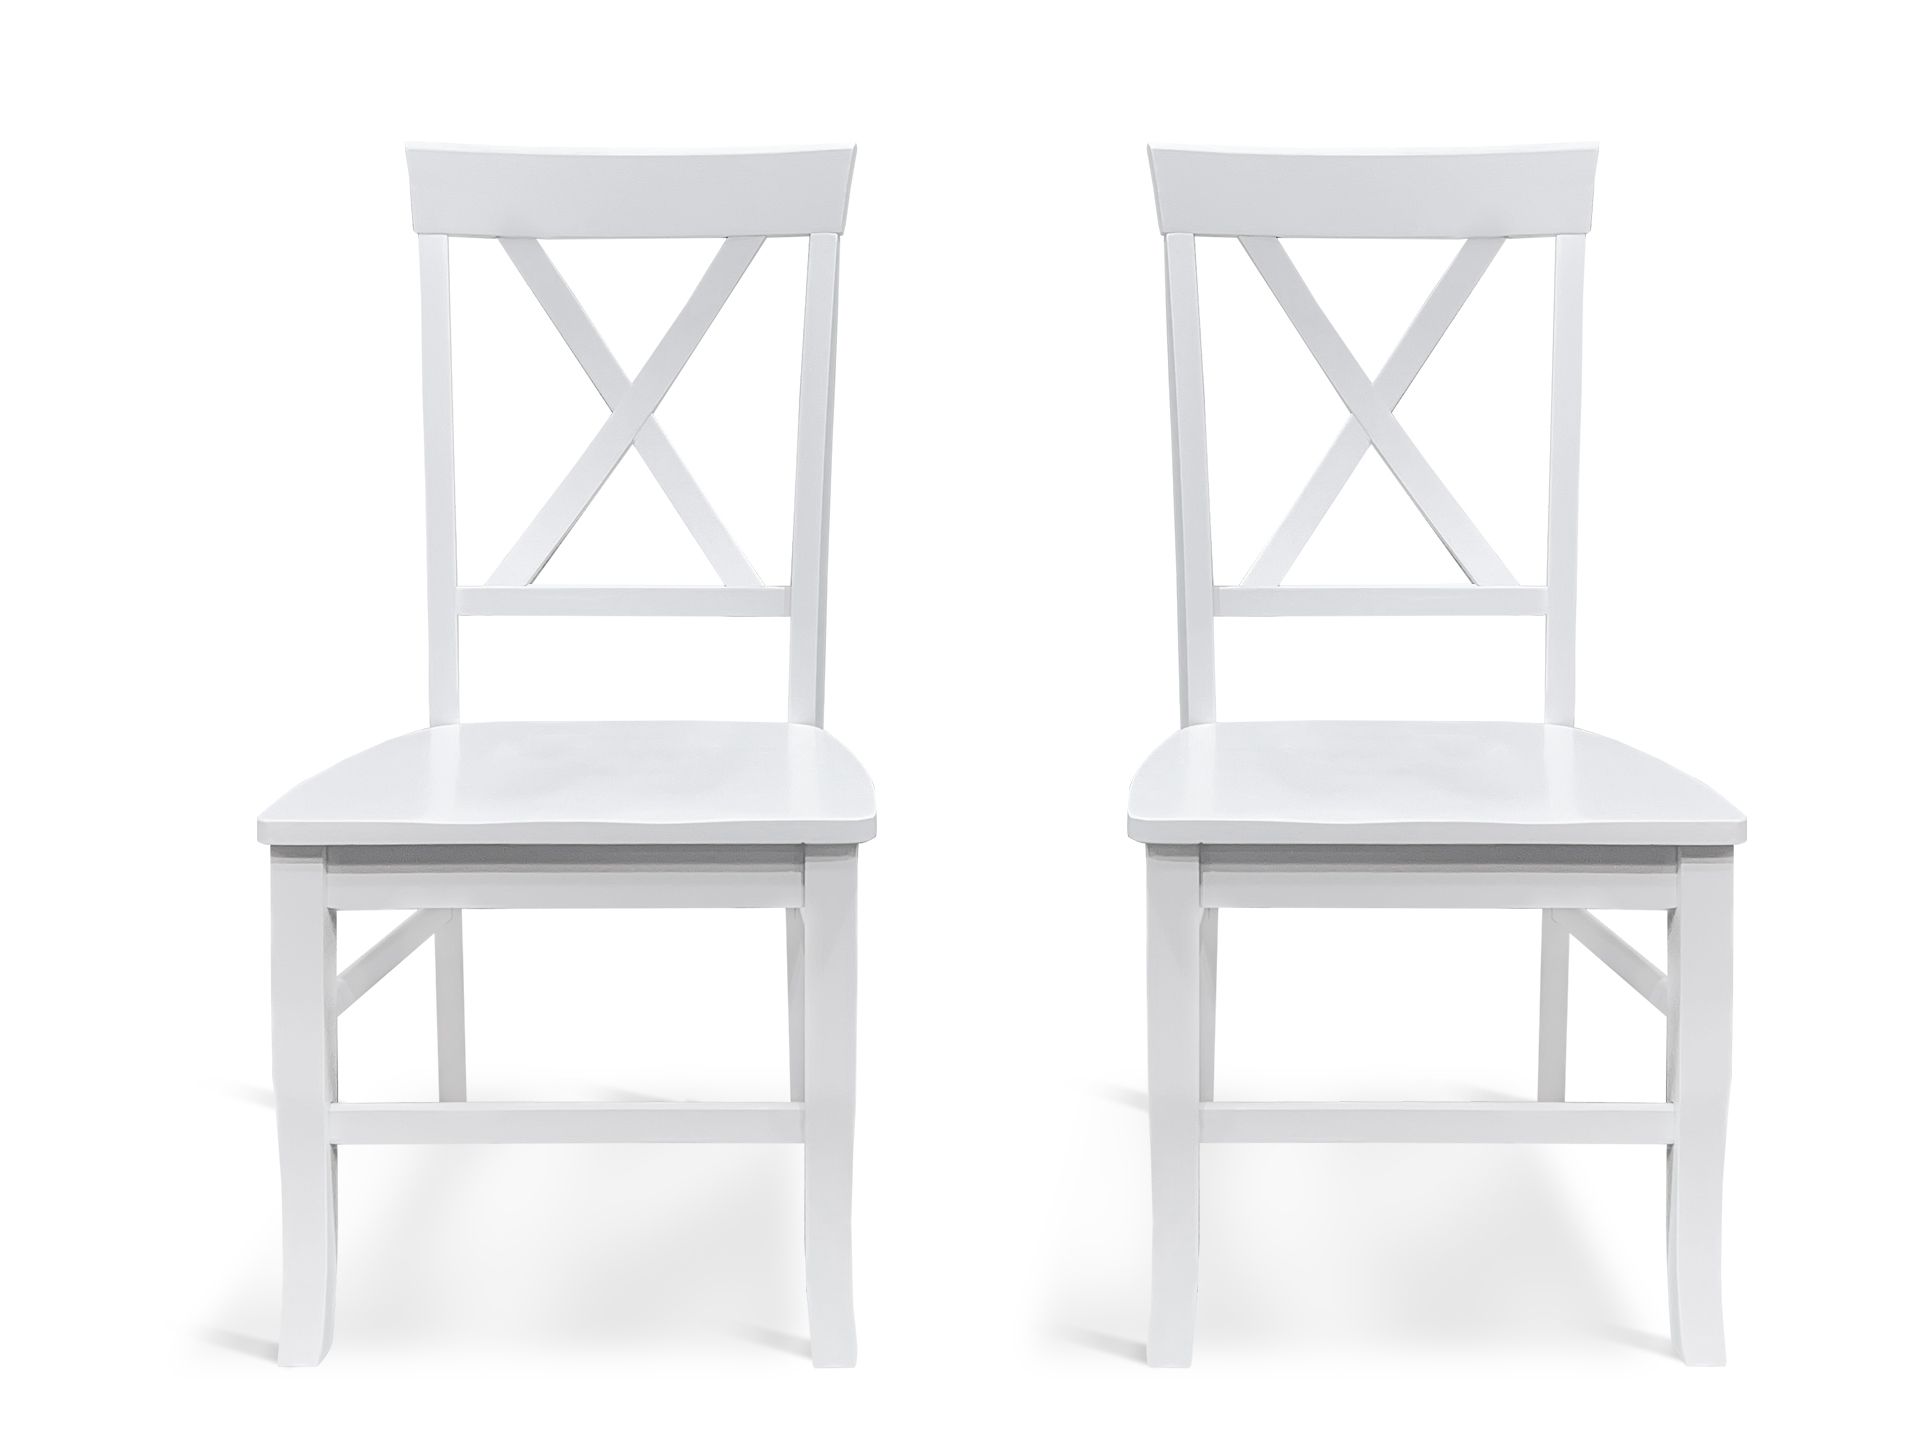 Bali 5 Piece Dining Room Furniture Package - White